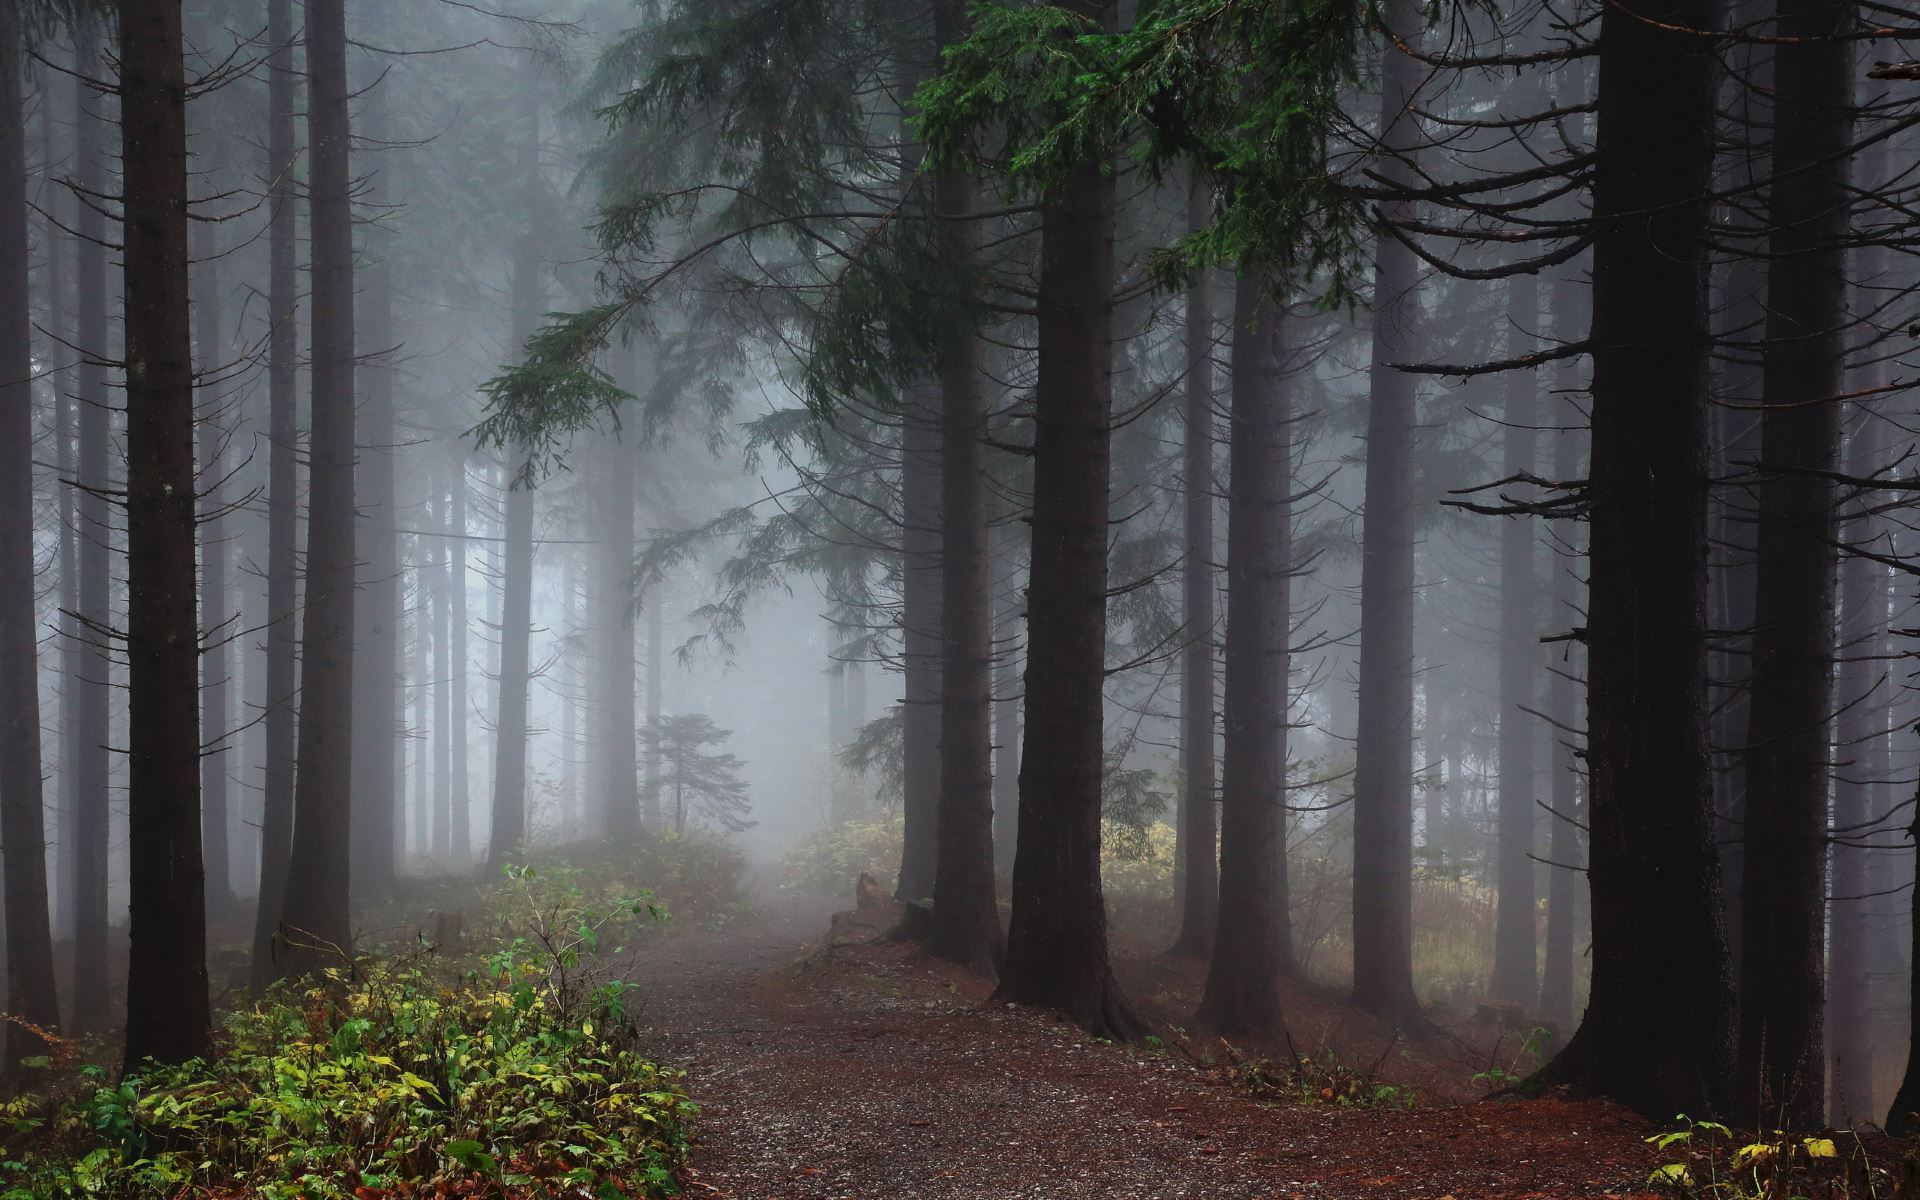 Beautiful foggy forest - HD wallpaper download. Wallpapers, pictures ...